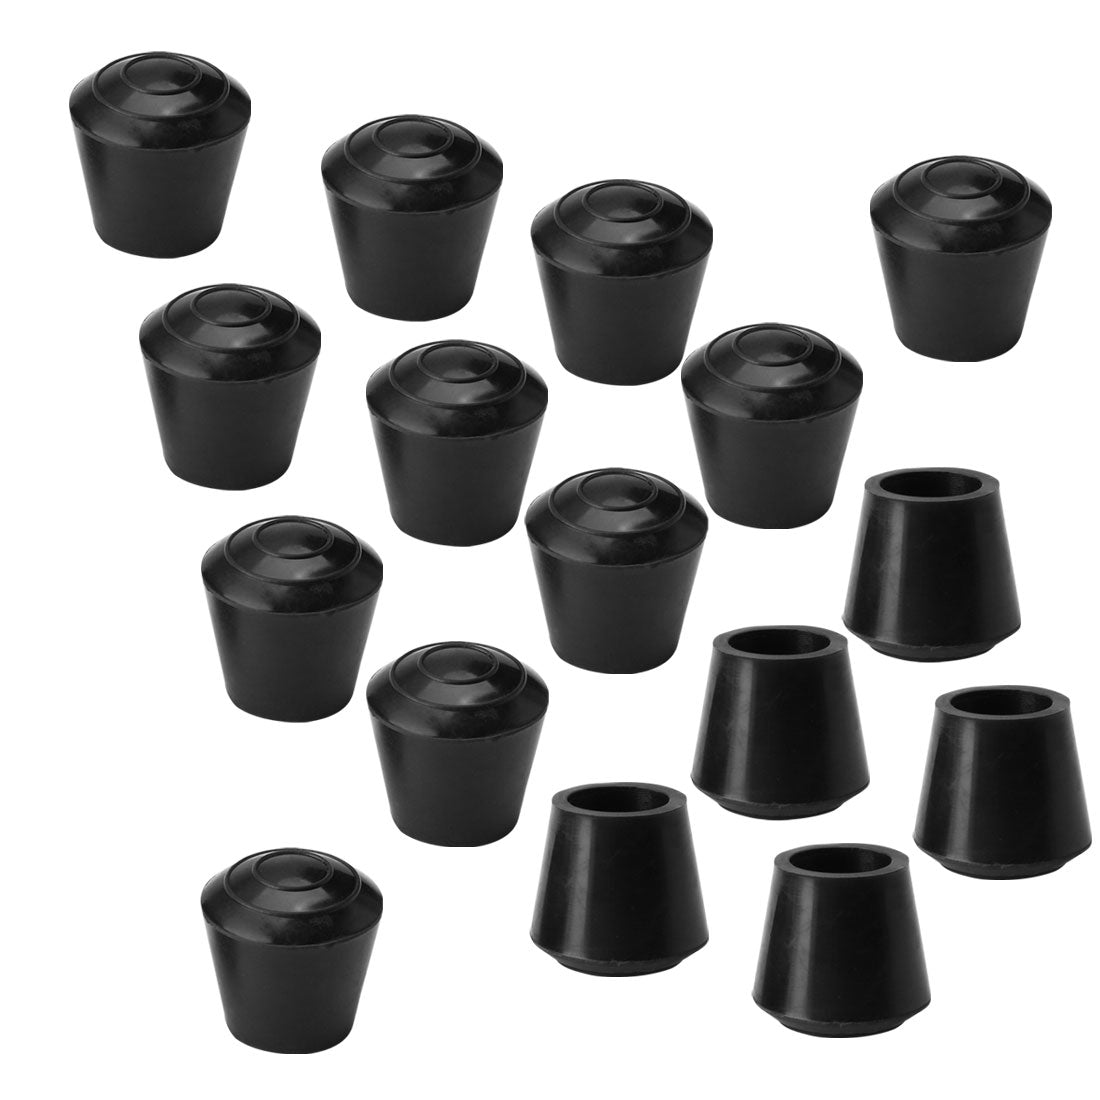 uxcell Uxcell Rubber Leg Cap Tip Cup Feet Cover 10mm 3/8" Inner Dia 16pcs for Furniture Chair